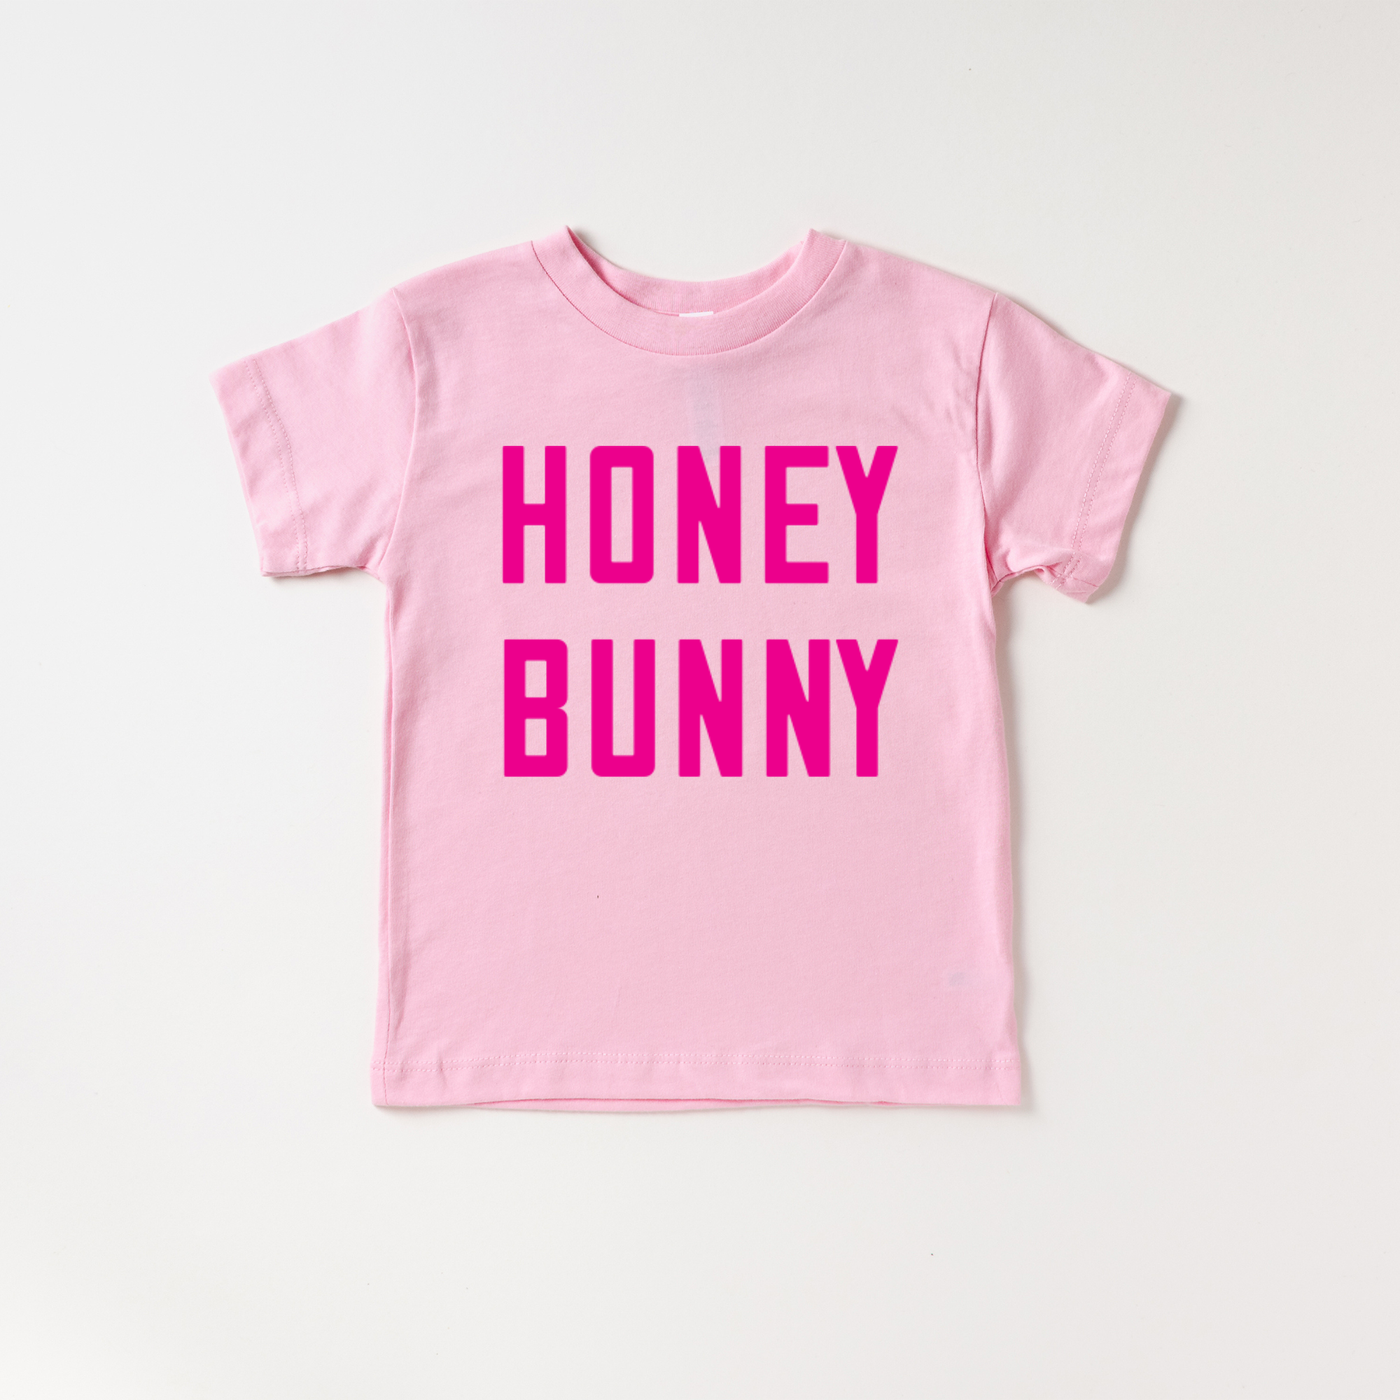 Honey Bunny Toddler and Youth Easter Shirt